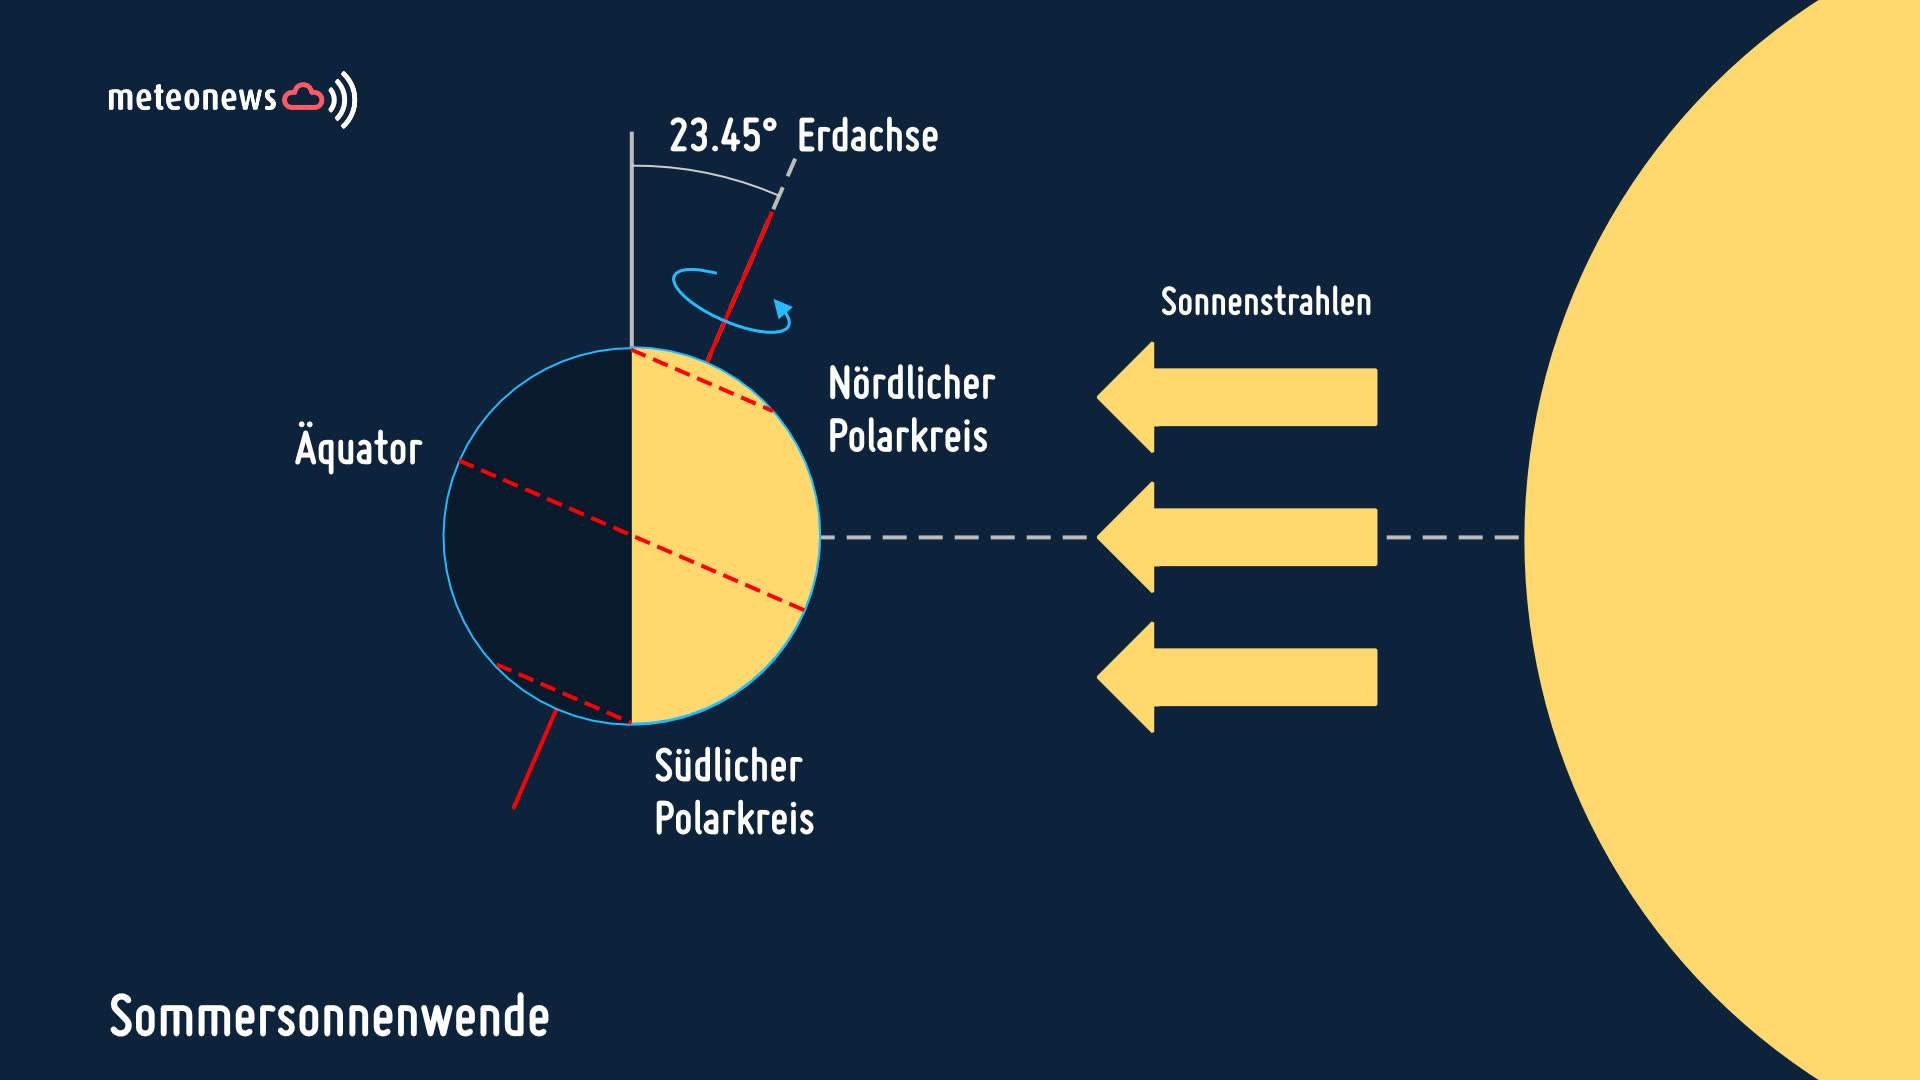 Fig. 1: Constellation at the astromomic/calendar beginning of summer resp. at the summer solstice; Source: MeteoNews